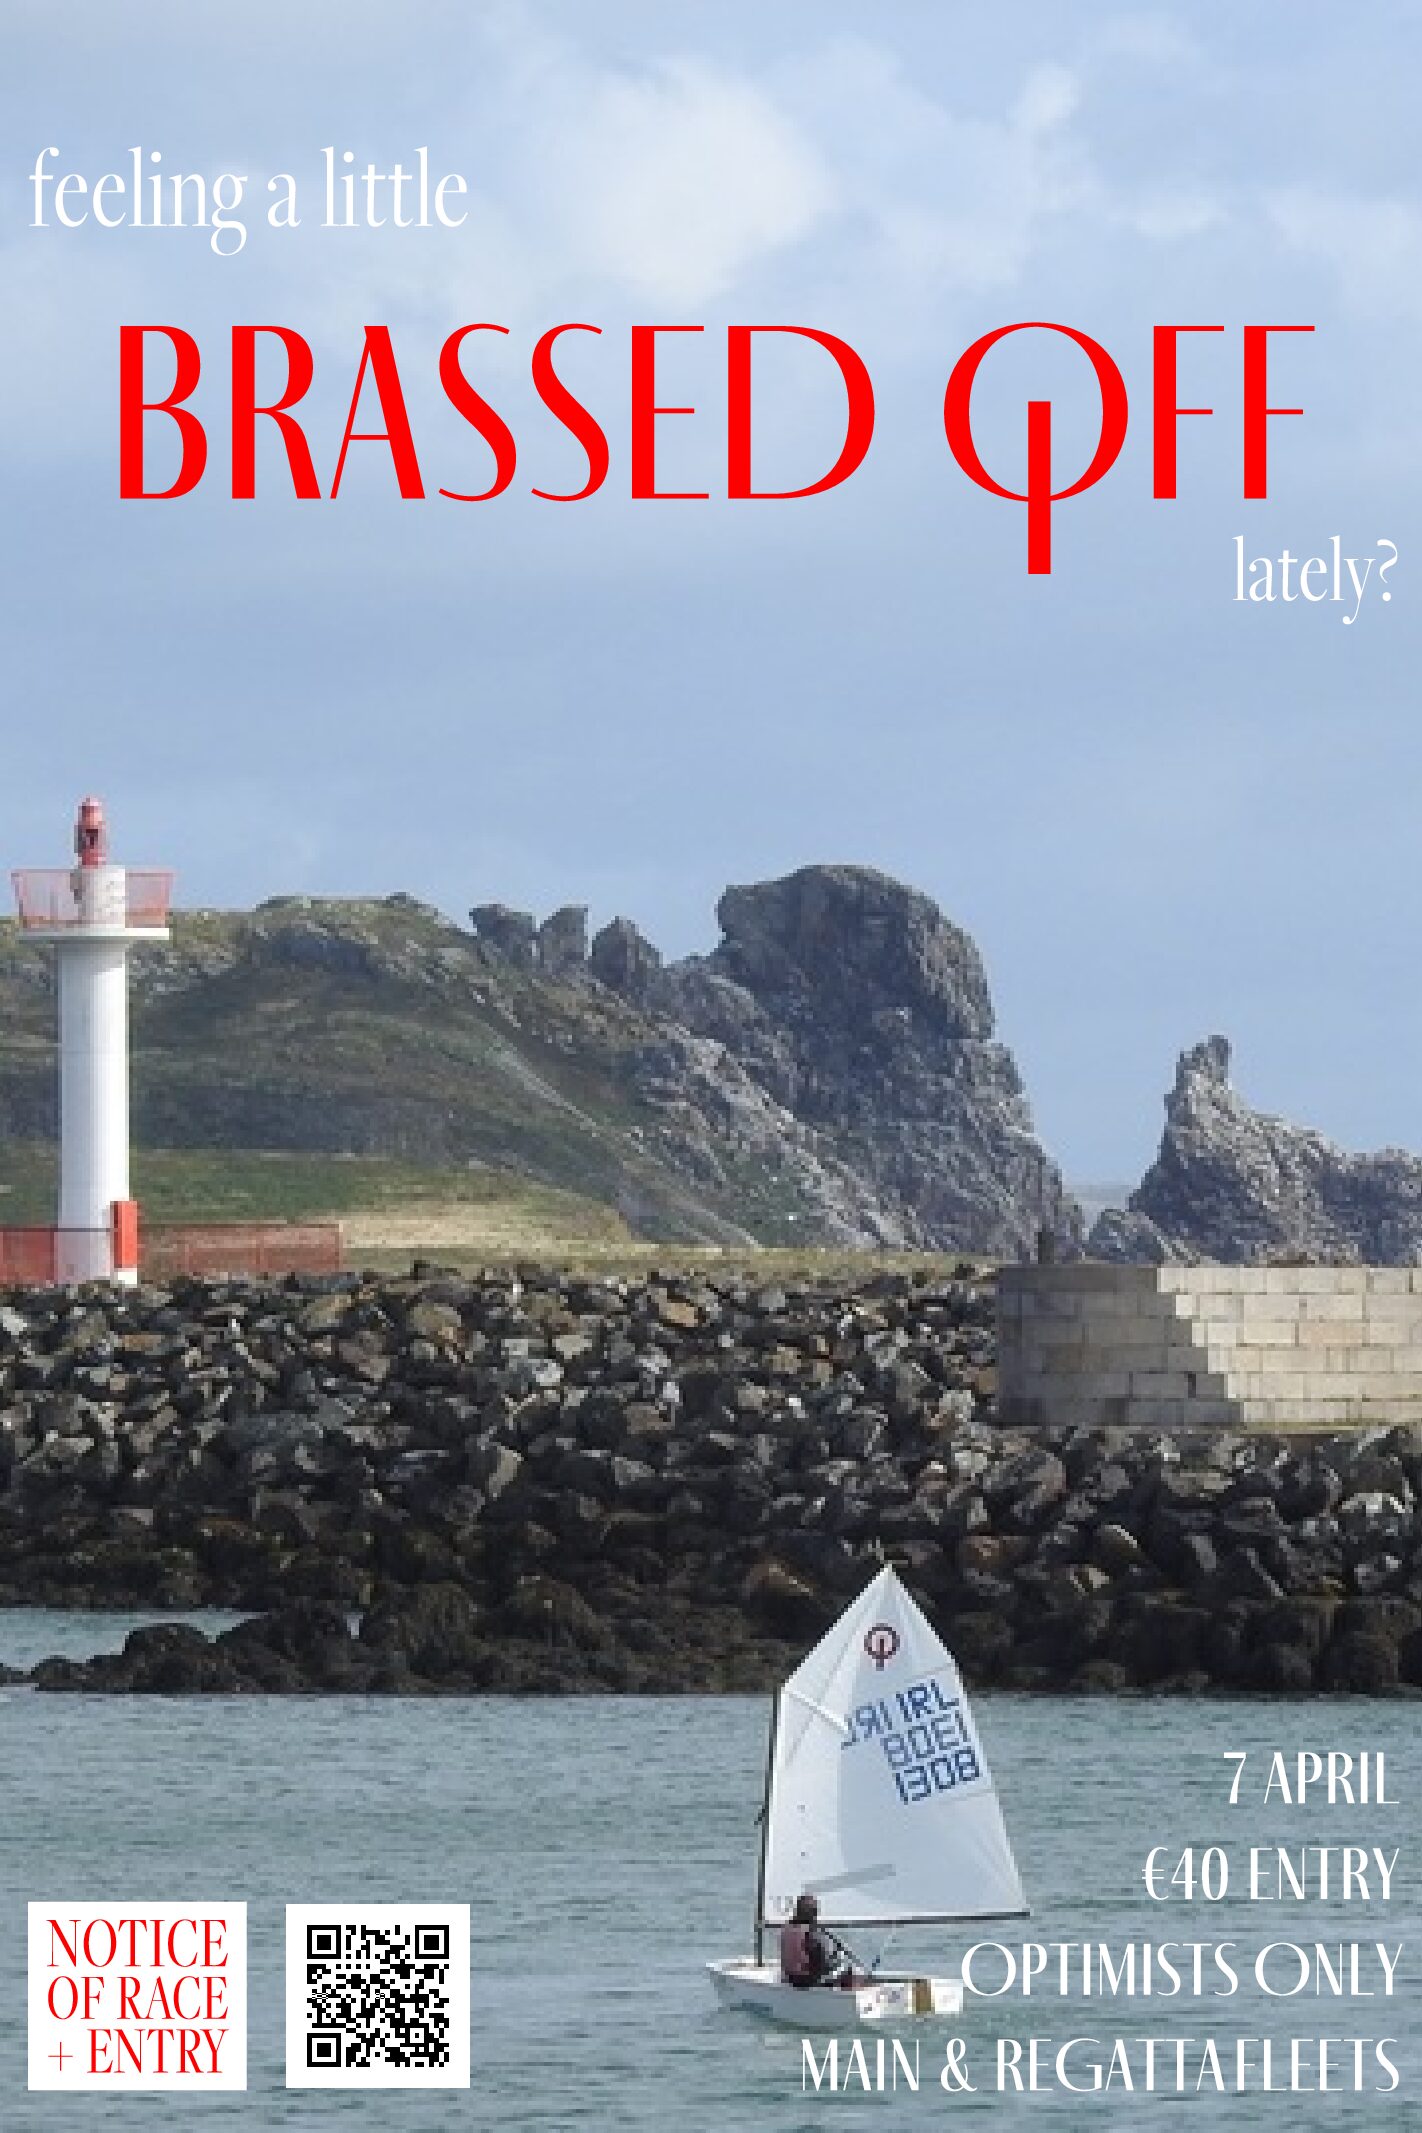 Howth Yacht Club’s annual Brassed Off Cup